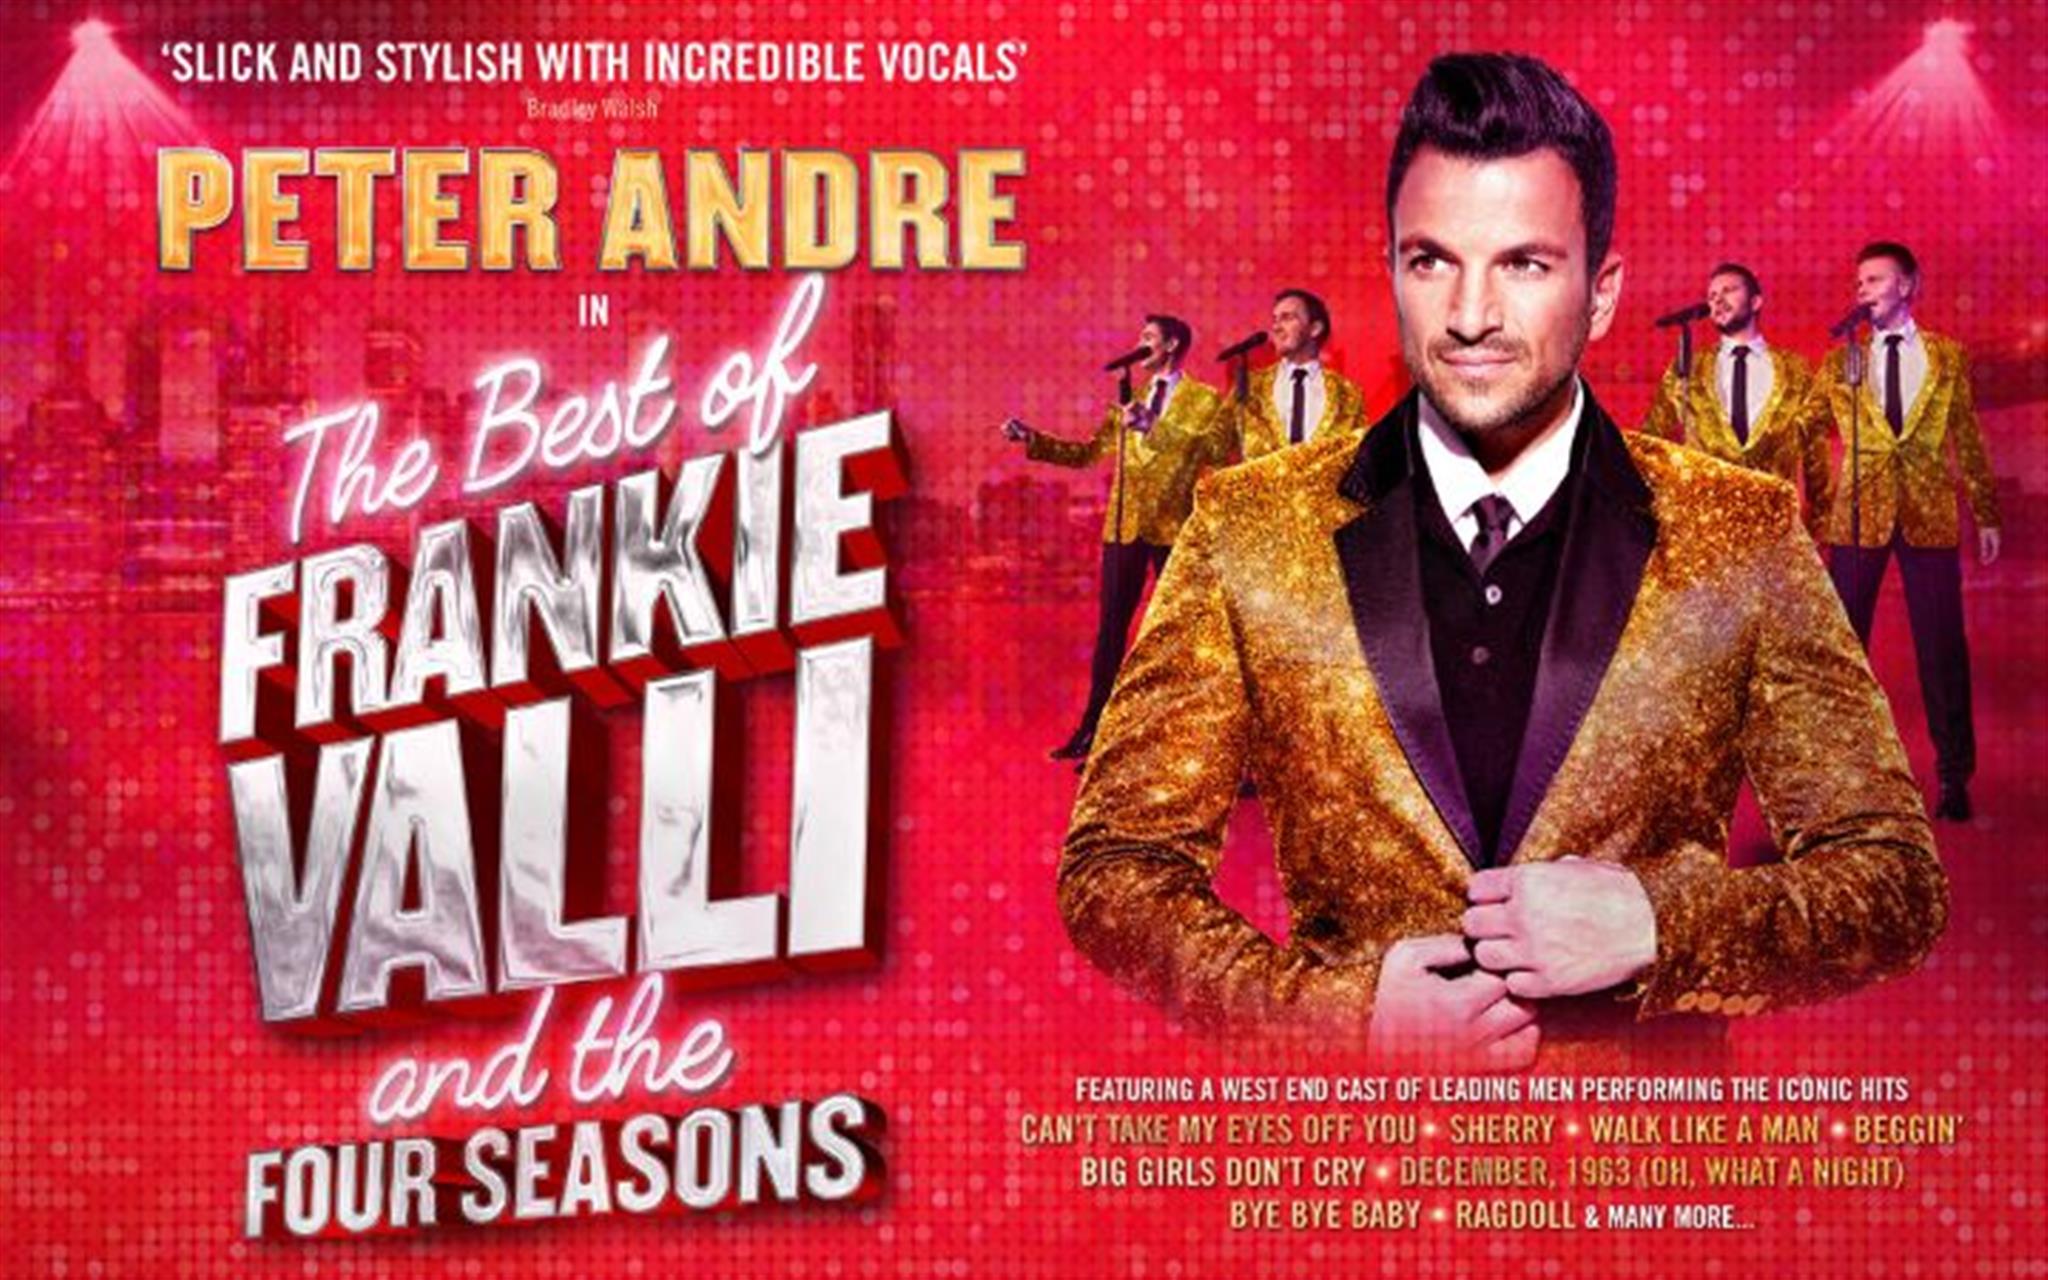 Peter Andre: The Best of Frankie Valli and the Four Seasons